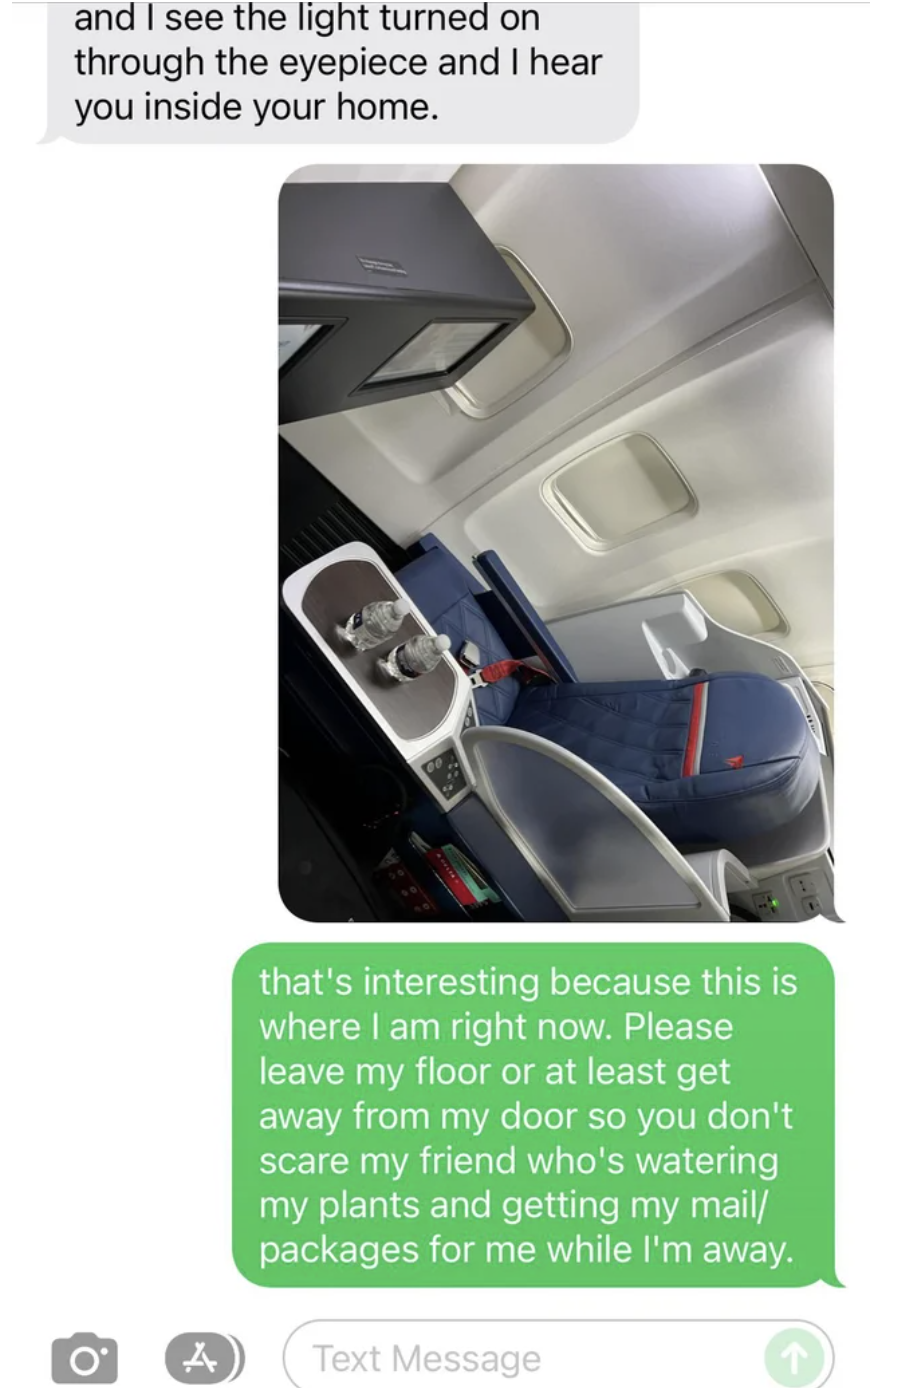 Text exchange ending with, &quot;that&#x27;s interesting because this is where I am right now. Please leave my floor or at least get away from my door so you don&#x27;t scare my friend who&#x27;s watering my plants and getting my mail/packages for me while I&#x27;m away&quot;